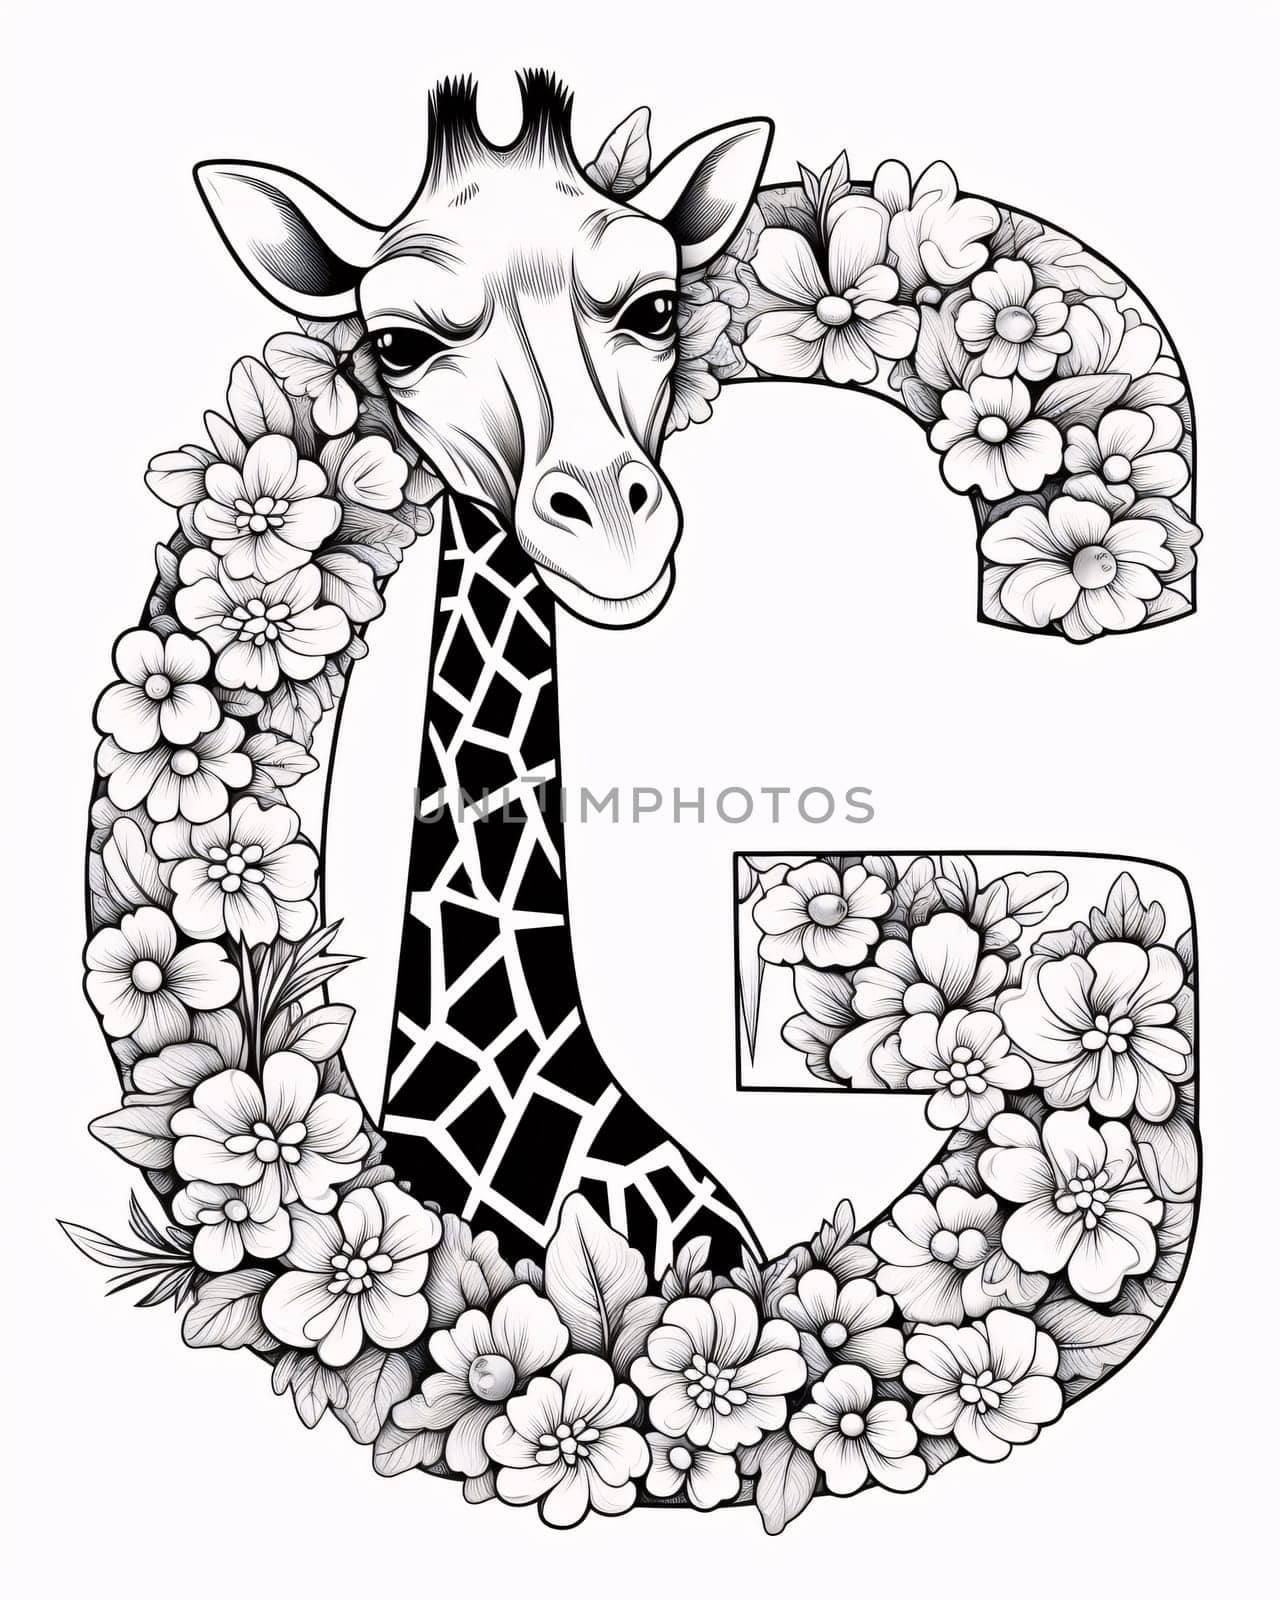 Graphic alphabet letters: Giraffe with floral capital letter G in black and white.